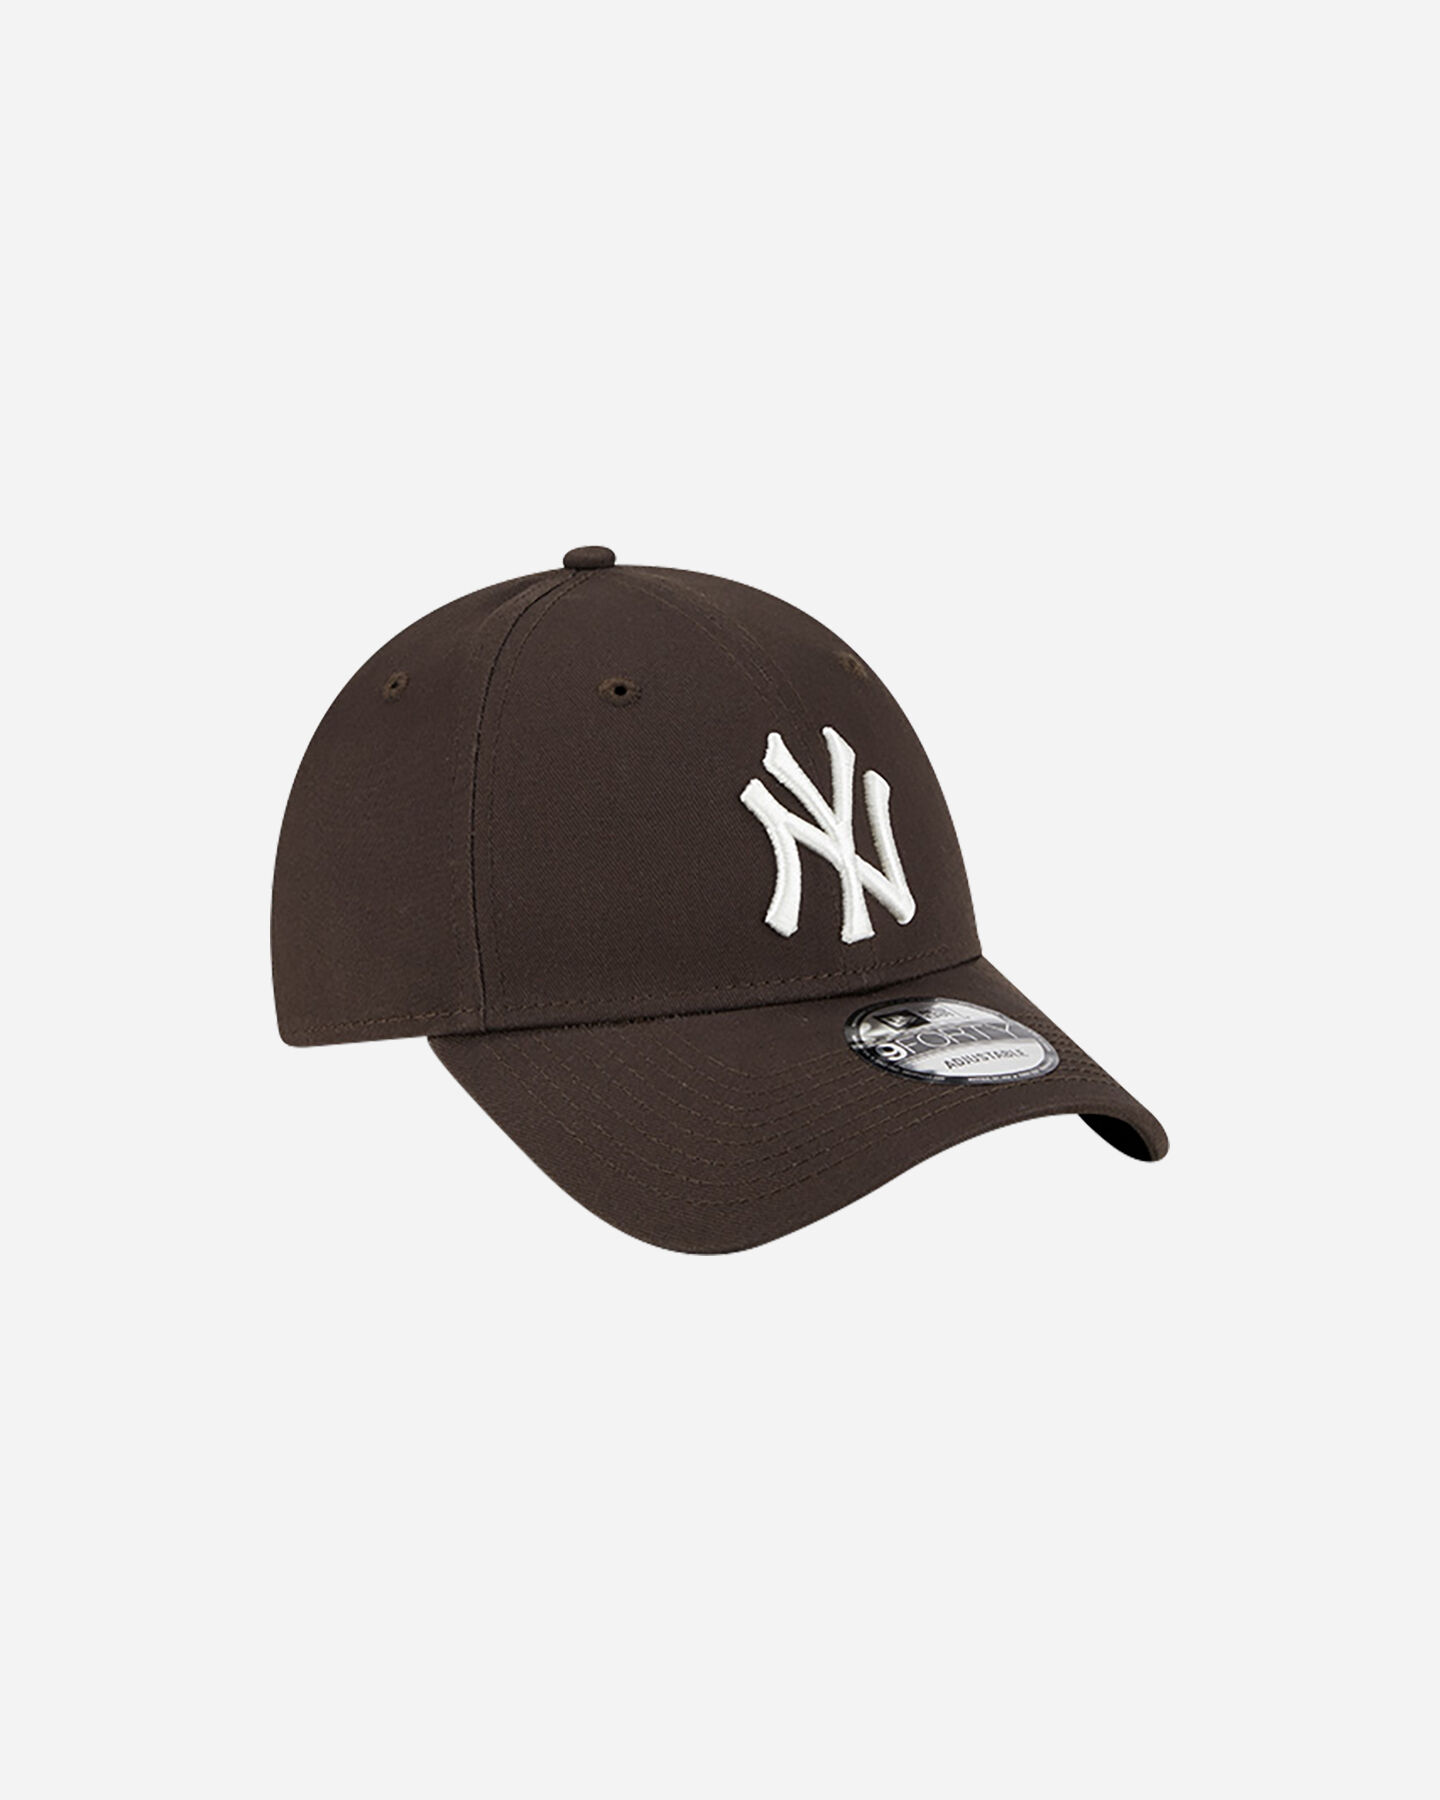  Cappellino NEW ERA 9FORTY MLB LEAGUE NEW YORK YANKEES  S5630960|201|OSFM scatto 2